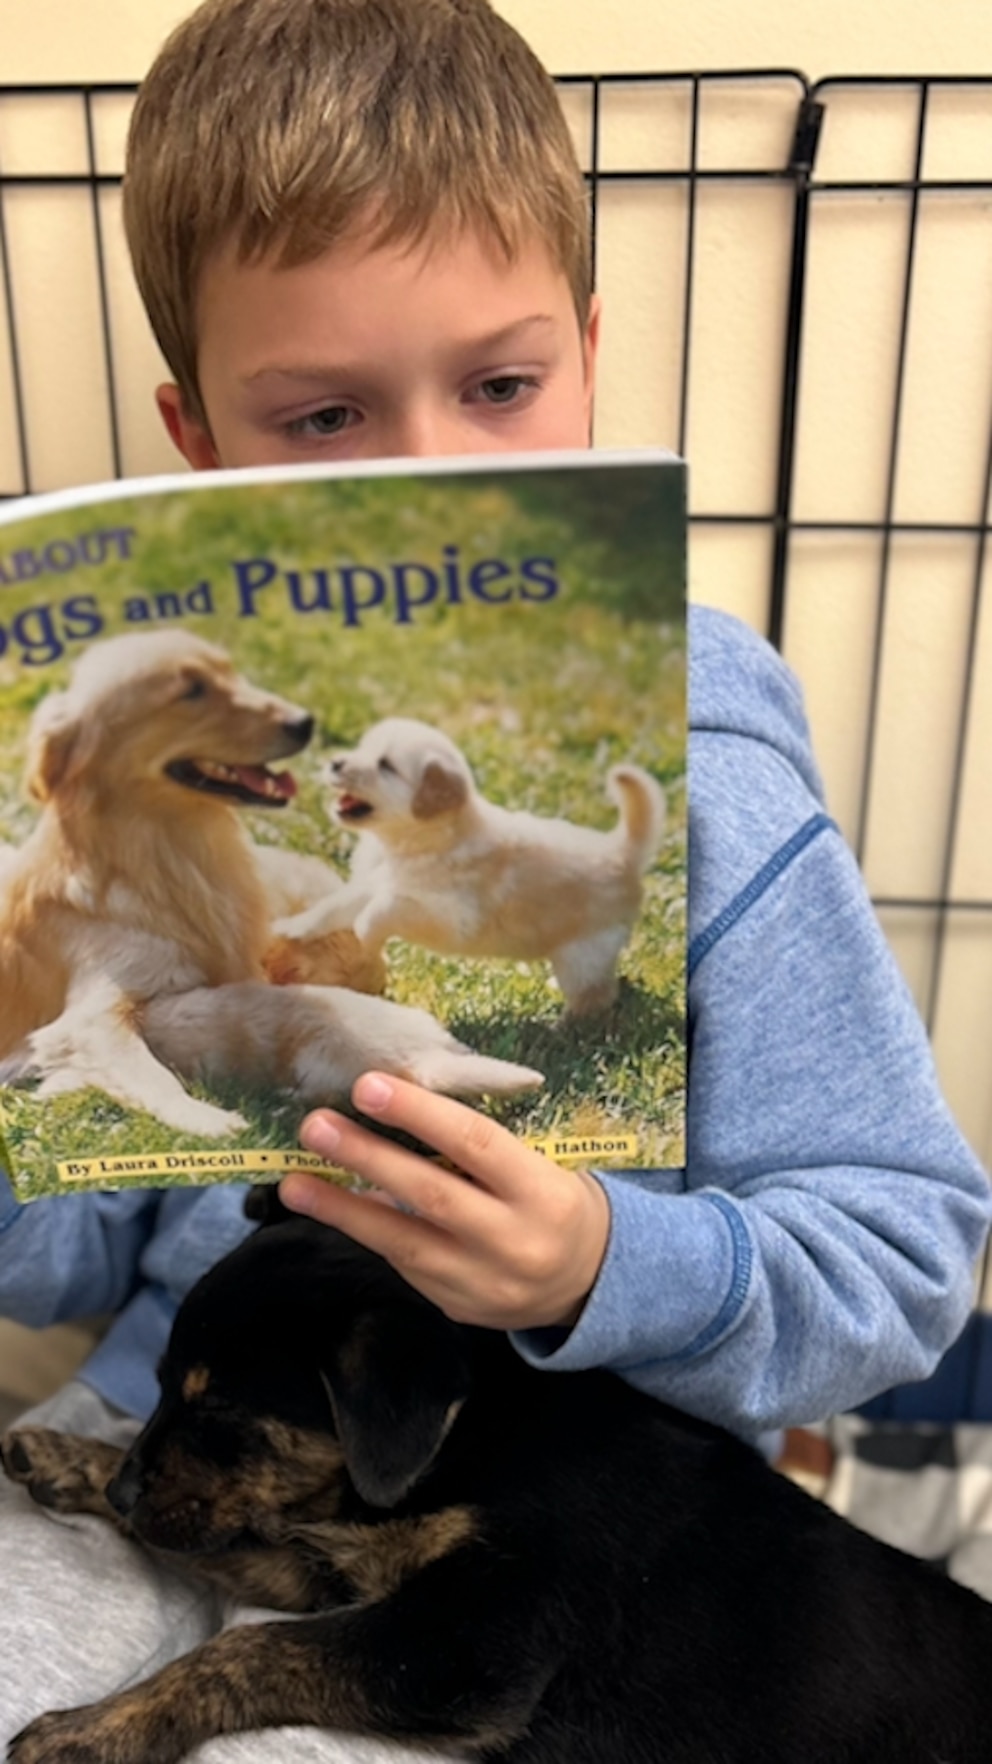 WATCH: First grade class uses foster puppies to enhance their reading skills